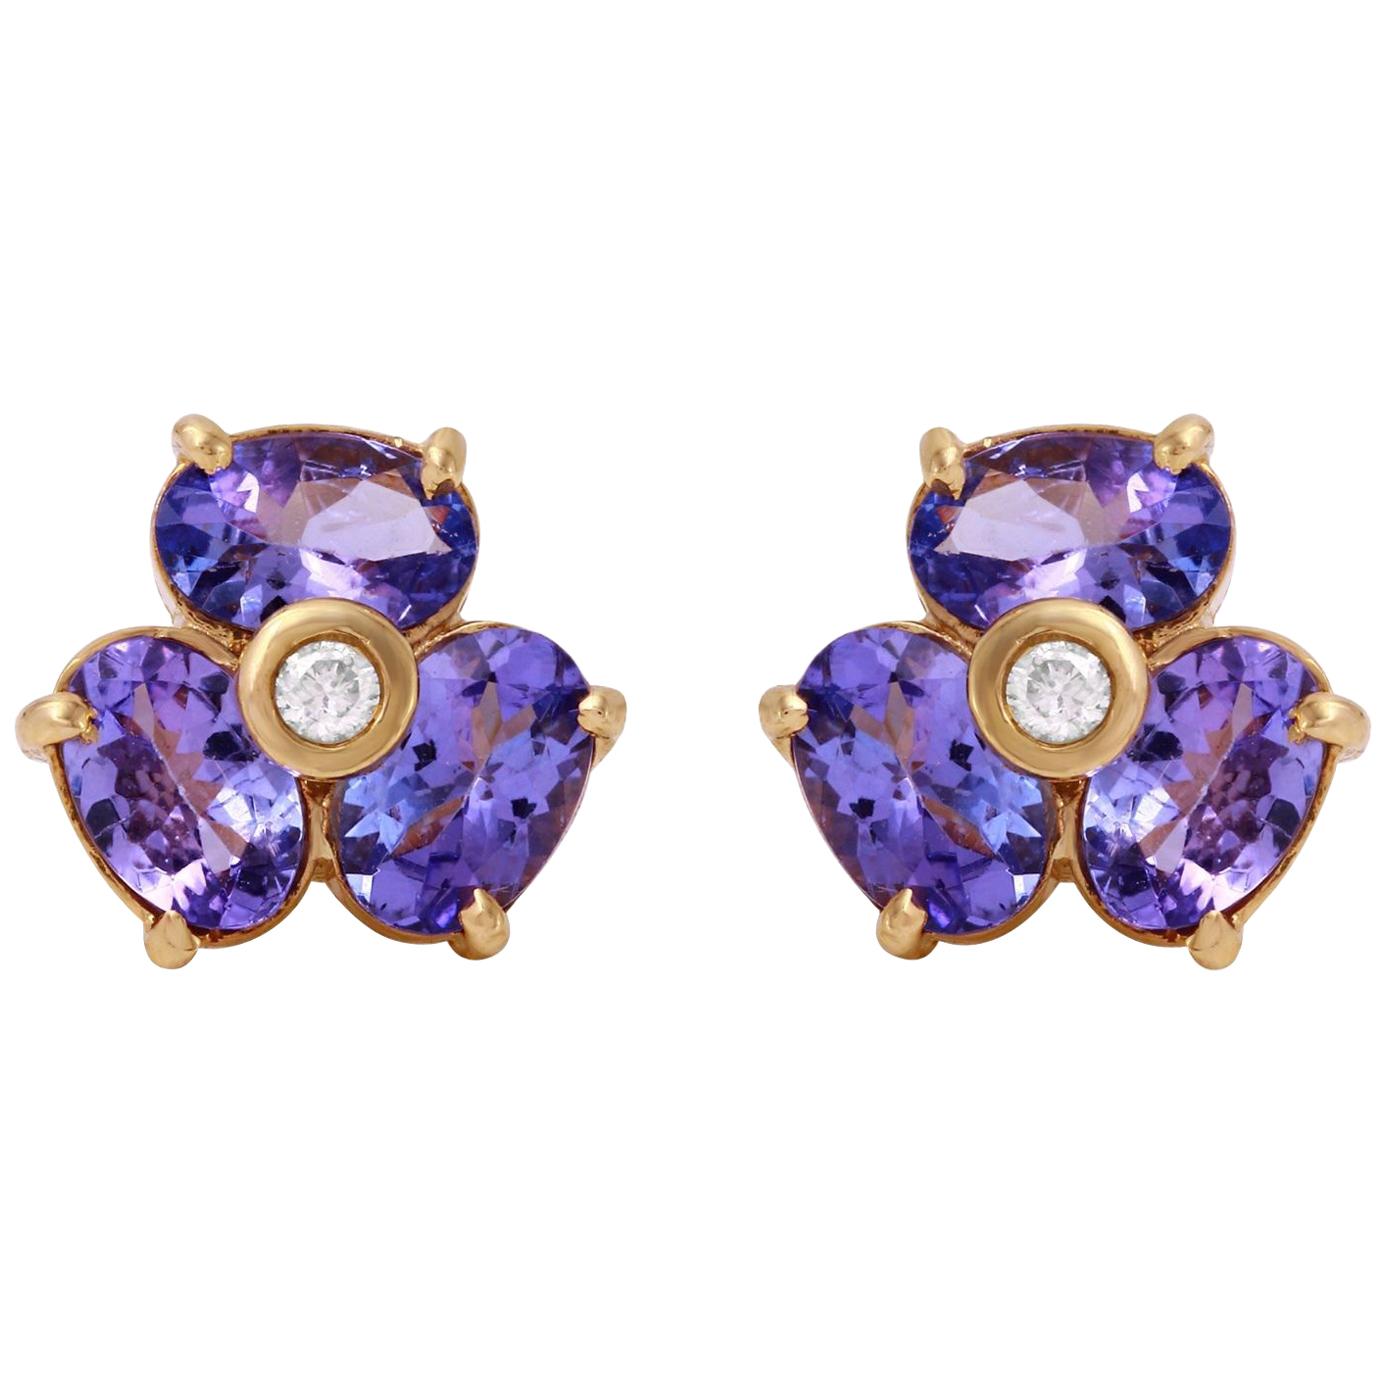 Exquisite 3.06 Carat Natural Tanzanite and Diamond 14K Solid Yellow Gold Stud